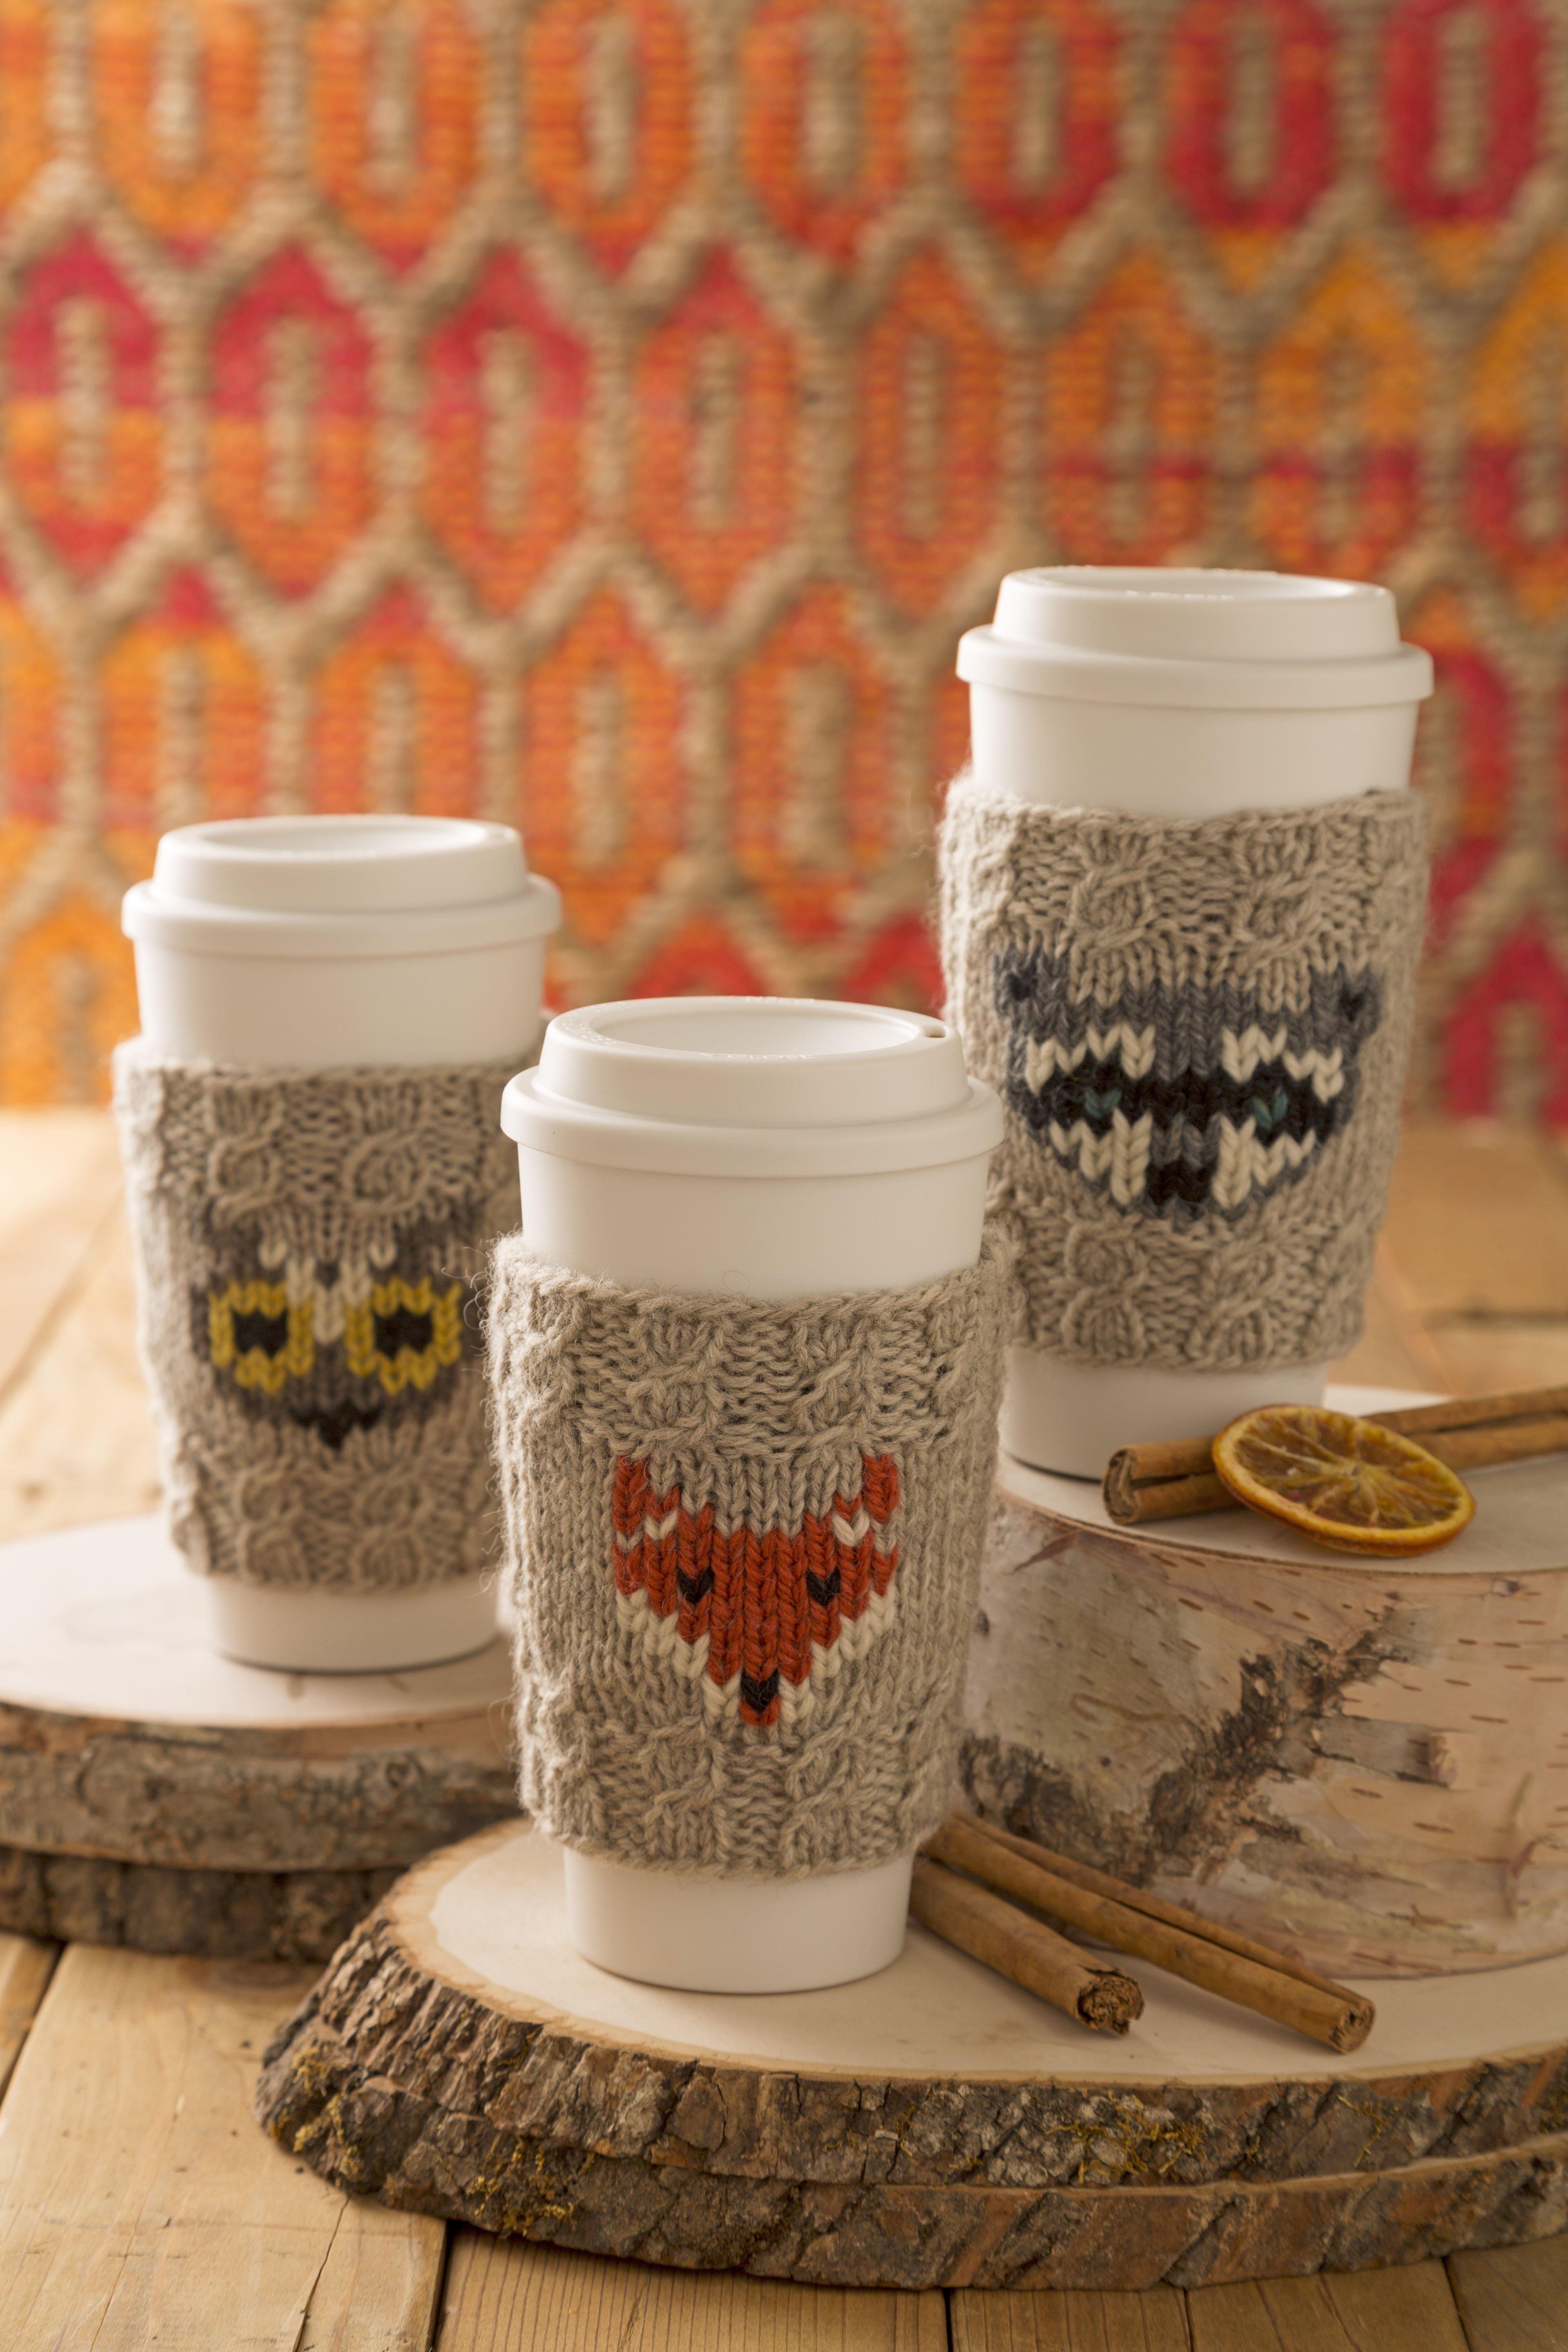 Cable Knit Coffee Cozy Pattern Forest Folk Cup Cozies Stitch And Unwind